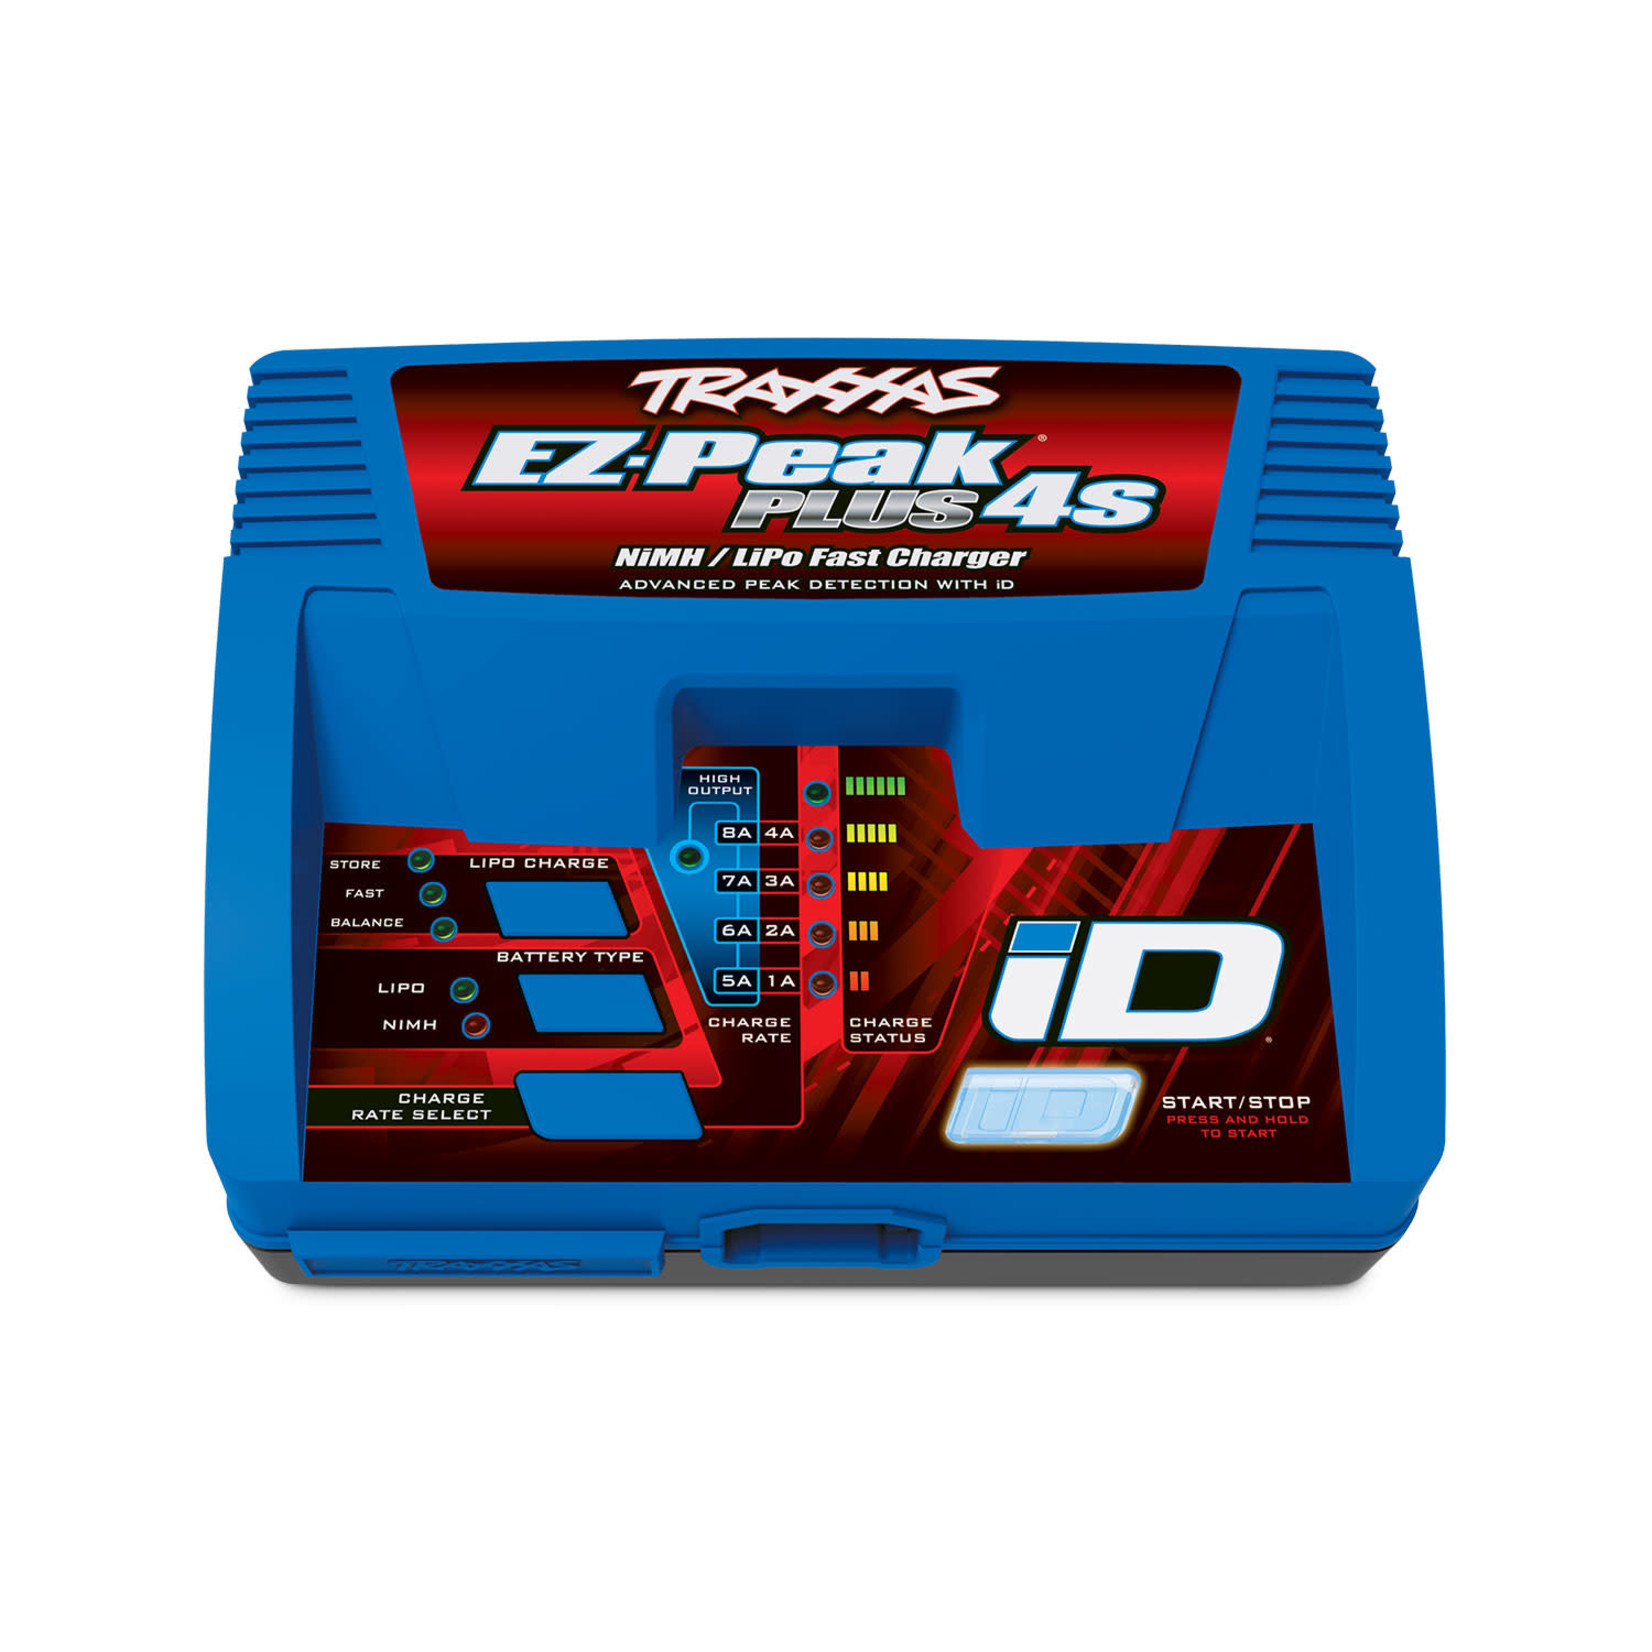 Traxxas TRA2981 Traxxas EZ-Peak 4S Multi-Chemistry Battery Charger (4S/8A/75W)